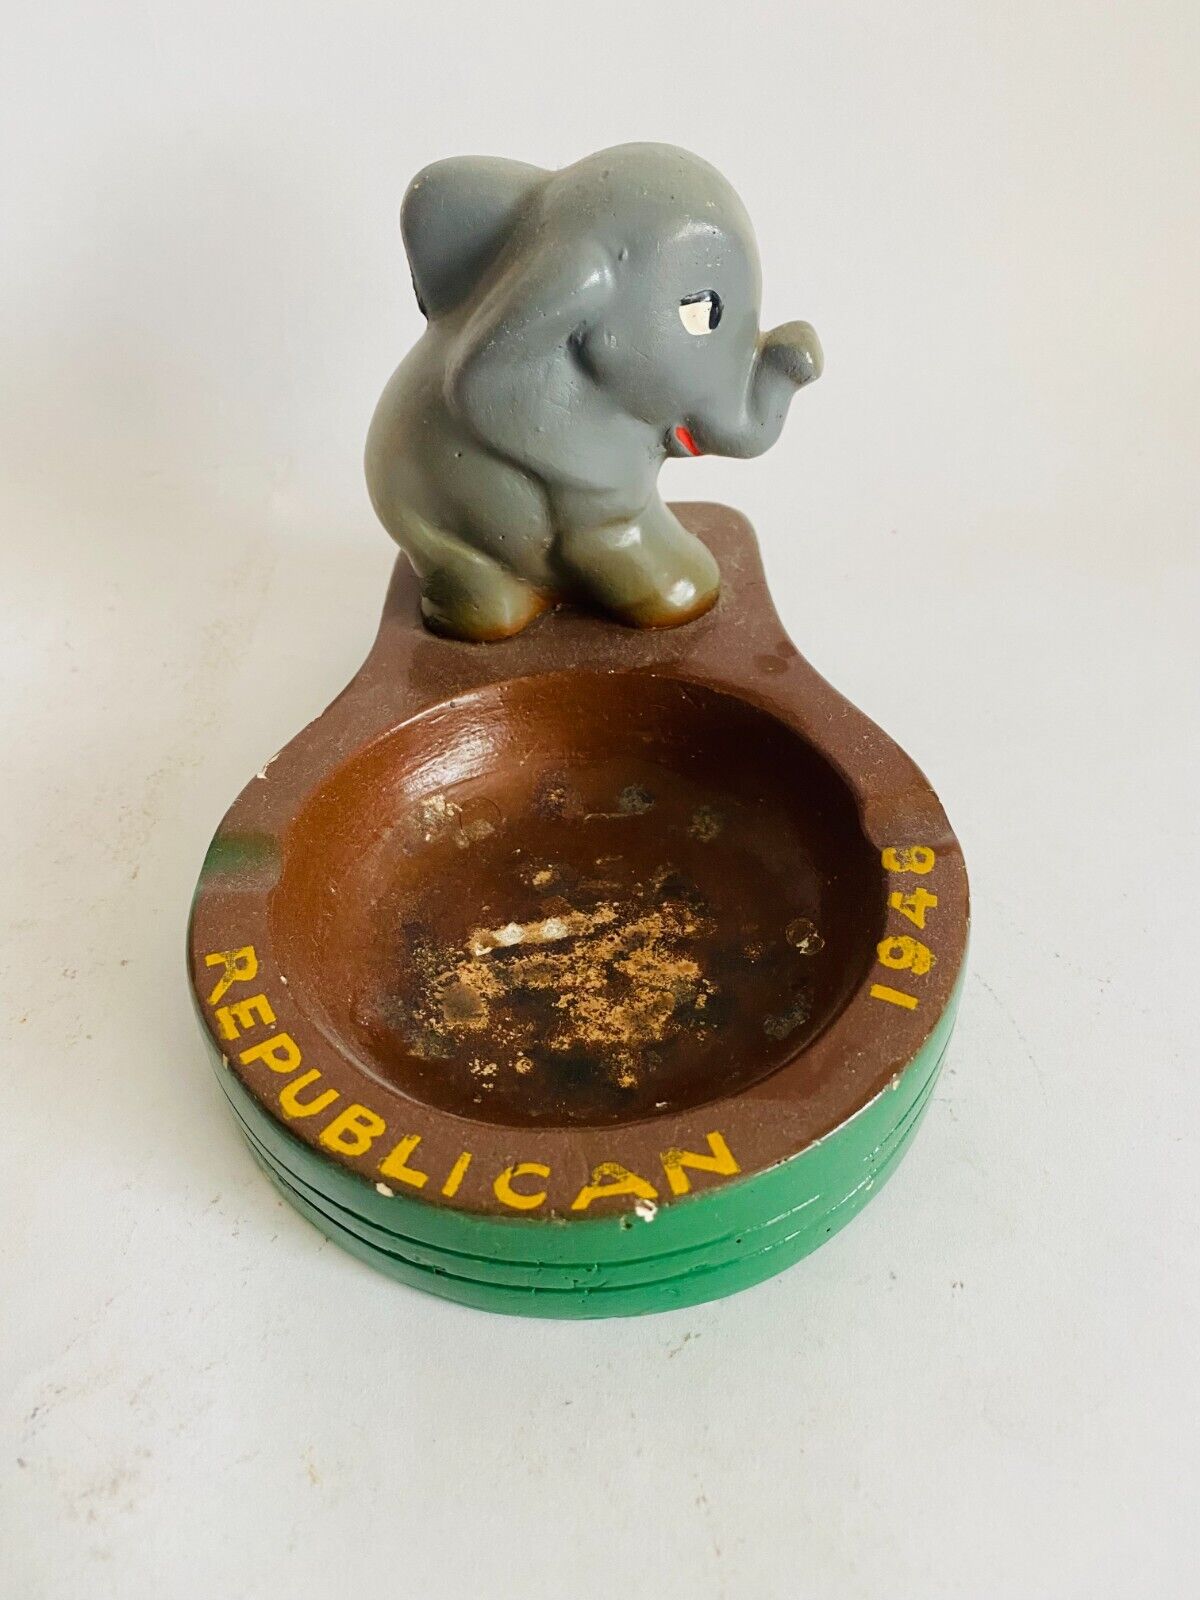 Vintage 1946 Republican National Committee Elephant Ashtray. RARE. Advertising